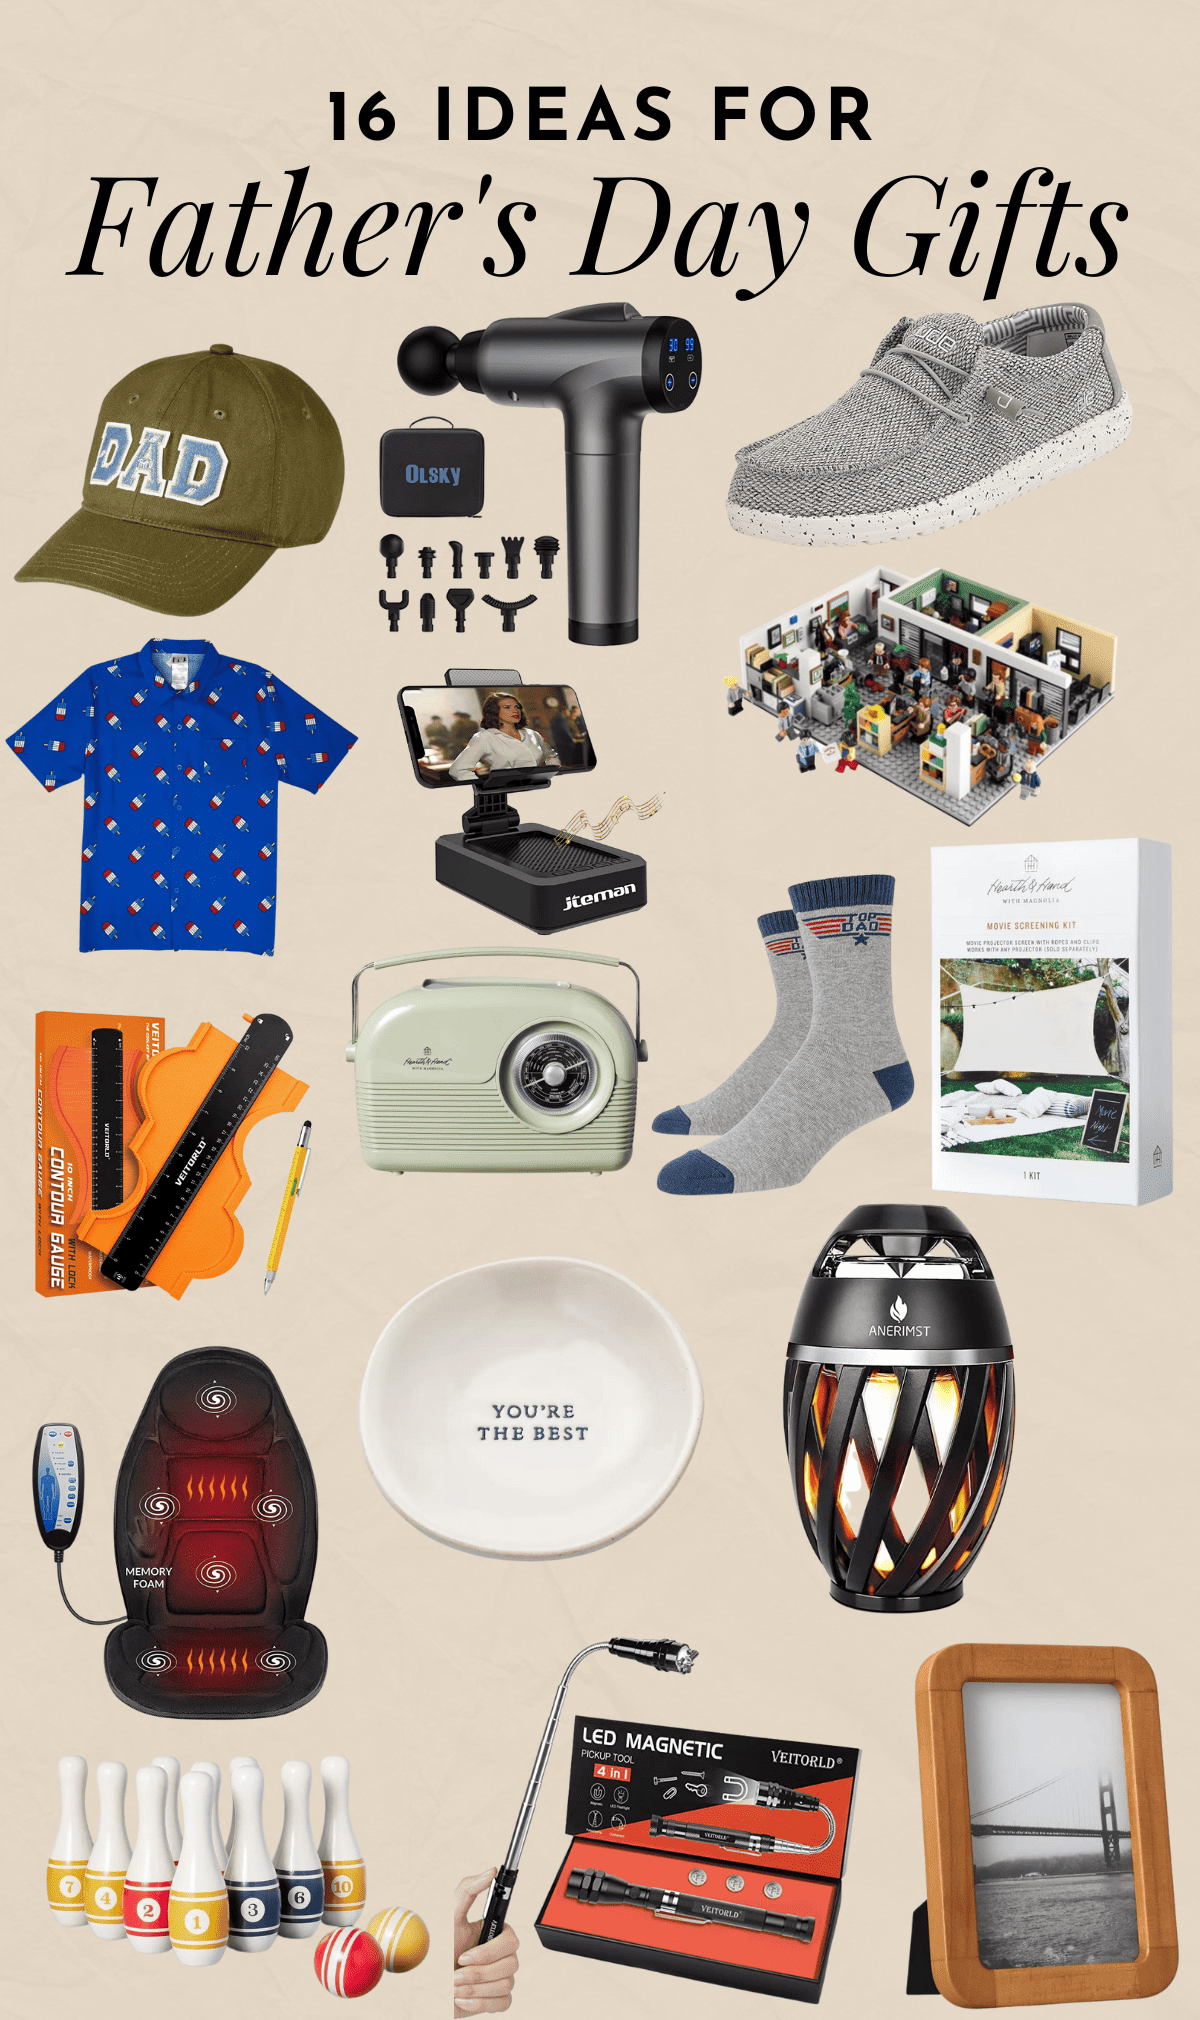 Expensive Gifts for Your Brother That He'll Love in 2024 - Von Baer